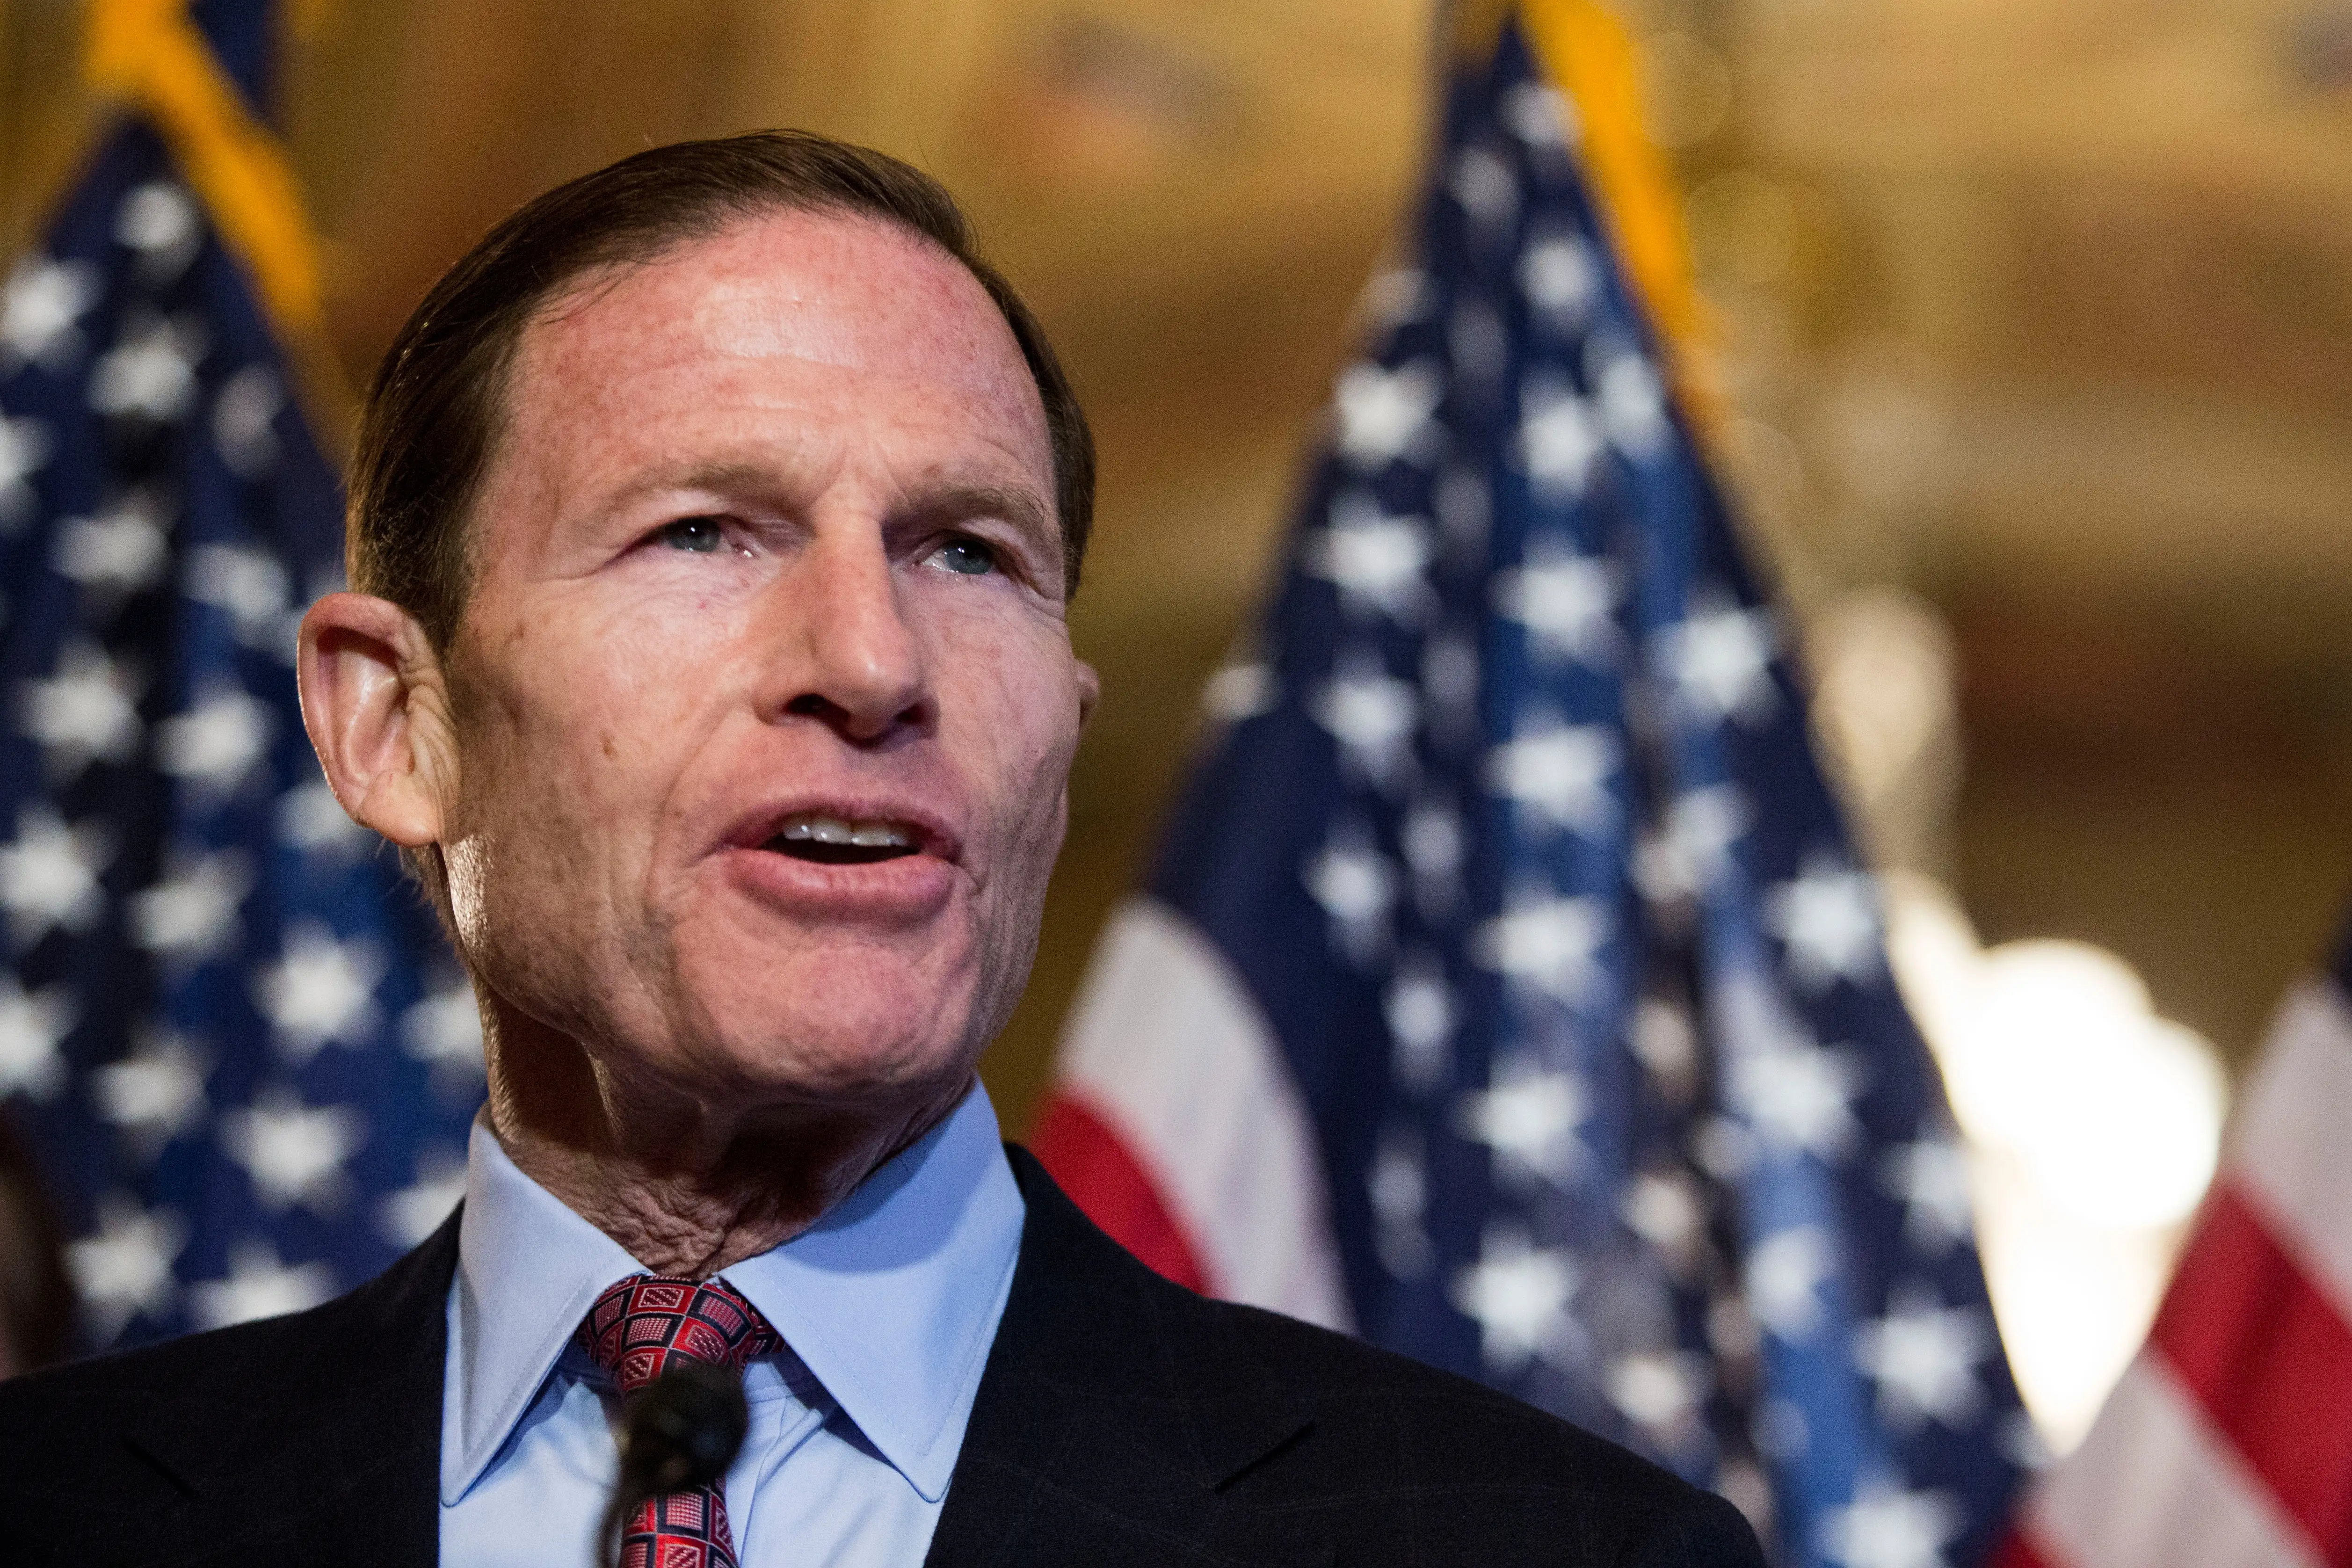 Sen. Richard Blumenthal (D-CT) speaks during a news conference on Capitol Hill, December 10, 2014 in Washington, DC.